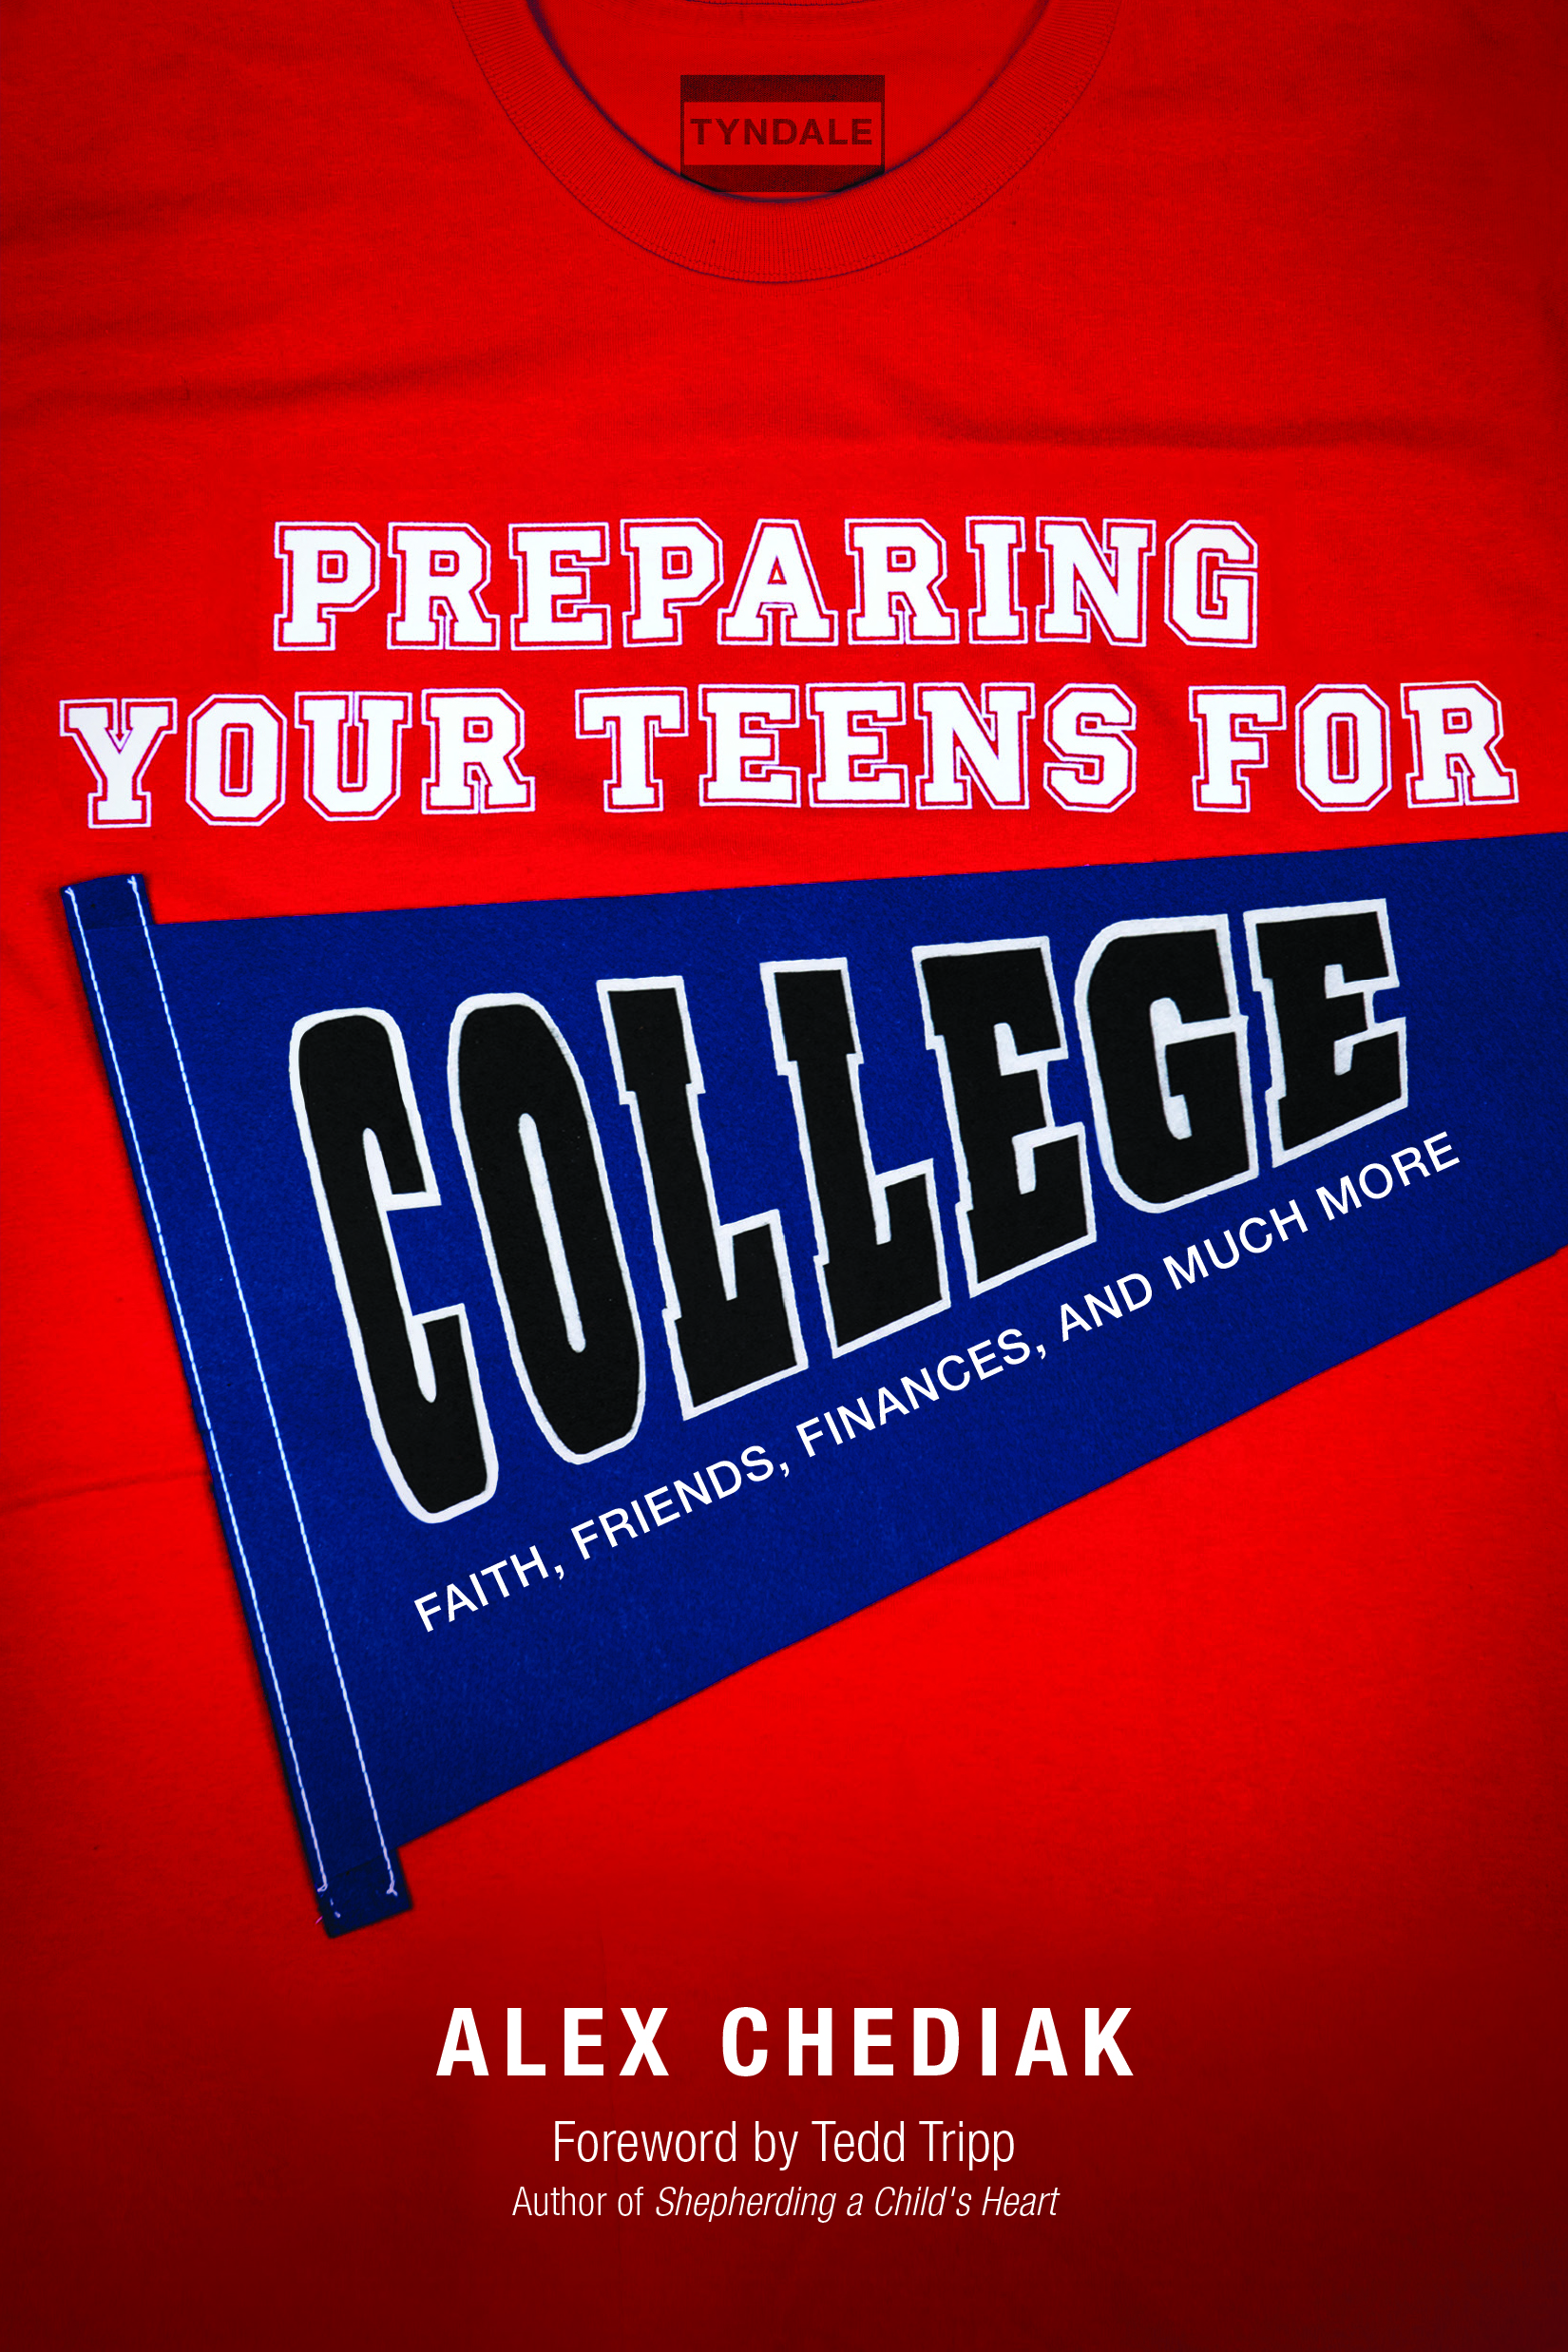 Interview with Douglas Bond on Preparing Your Teens for College